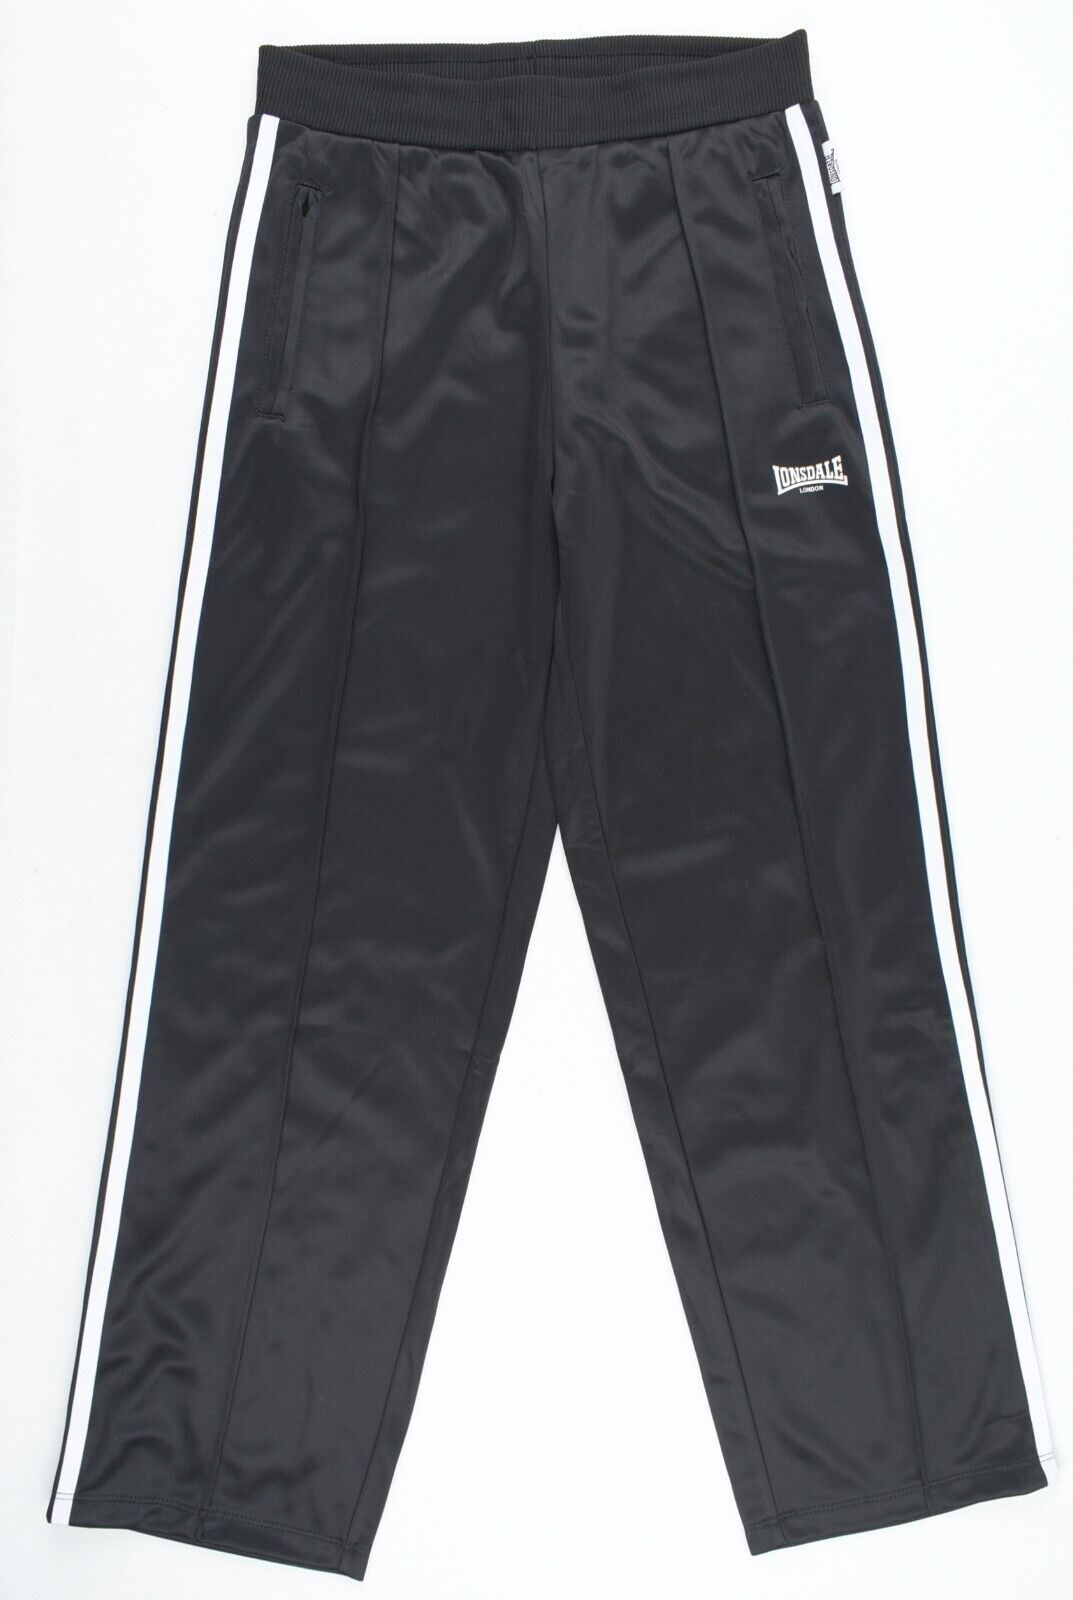 LONSDALE Girls Kids Track Pants, Joggers, Black, size 11-12 years